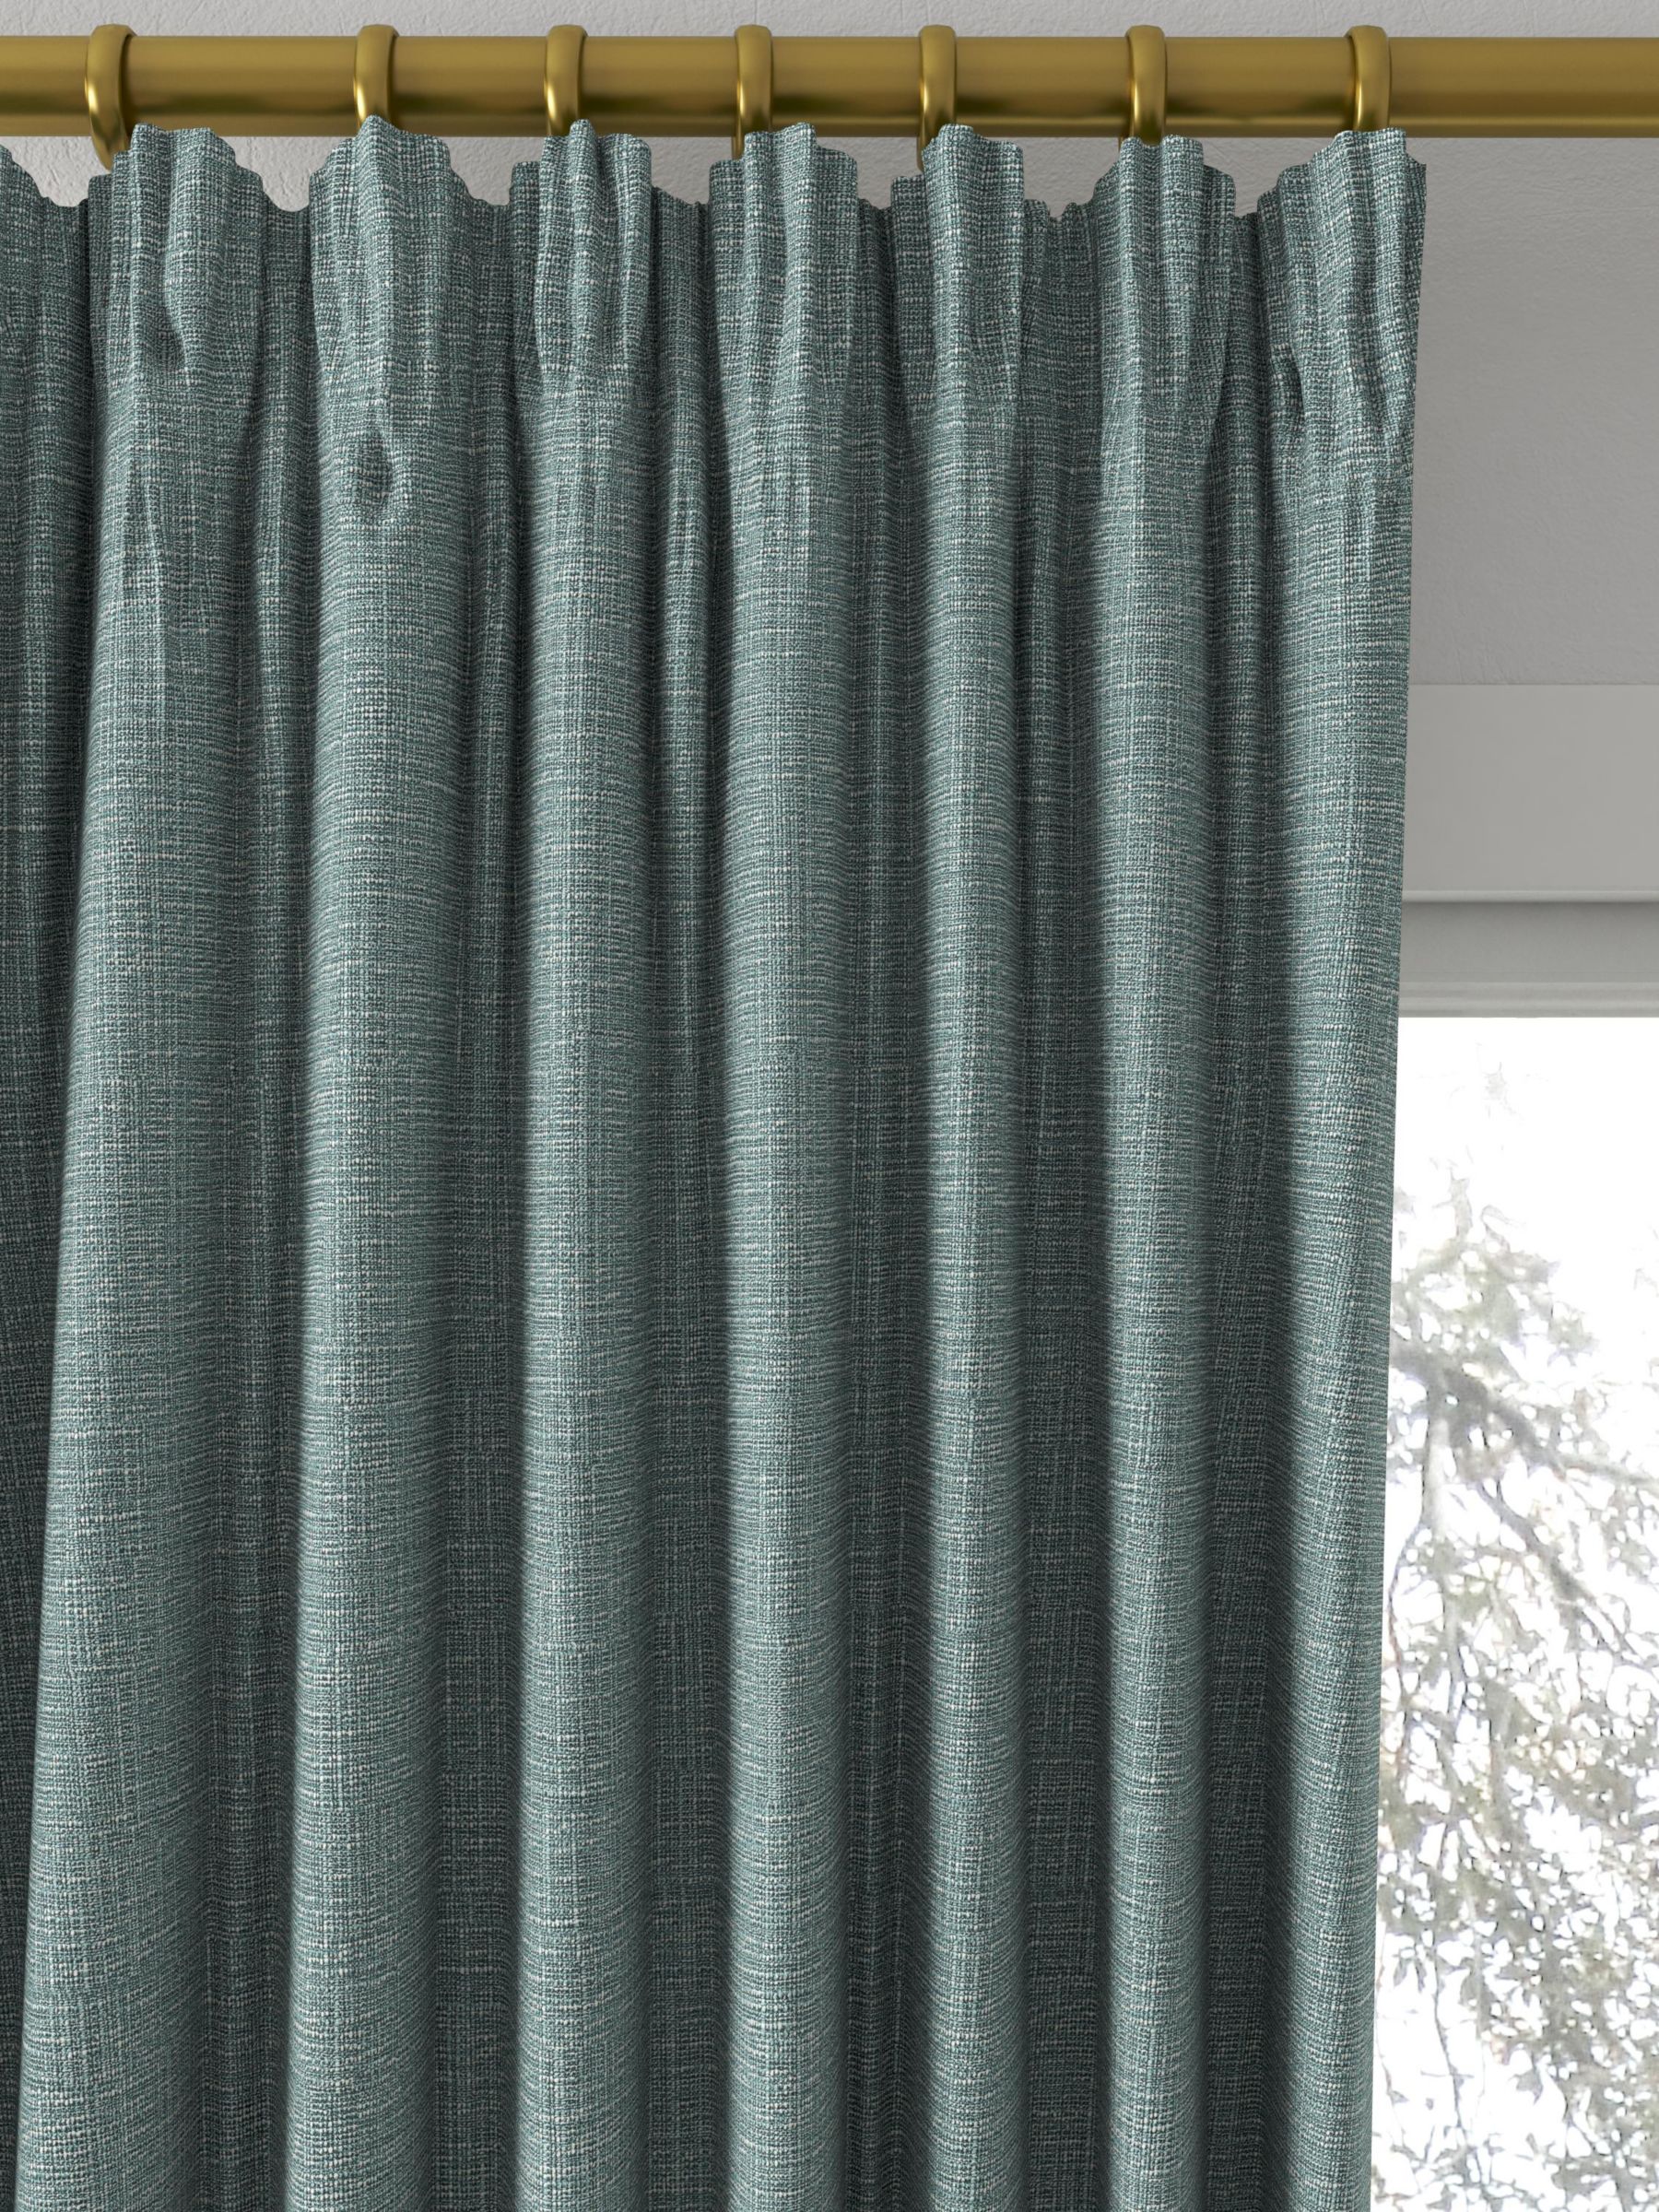 Designers Guild Tangalle Made to Measure Curtains, Viridian